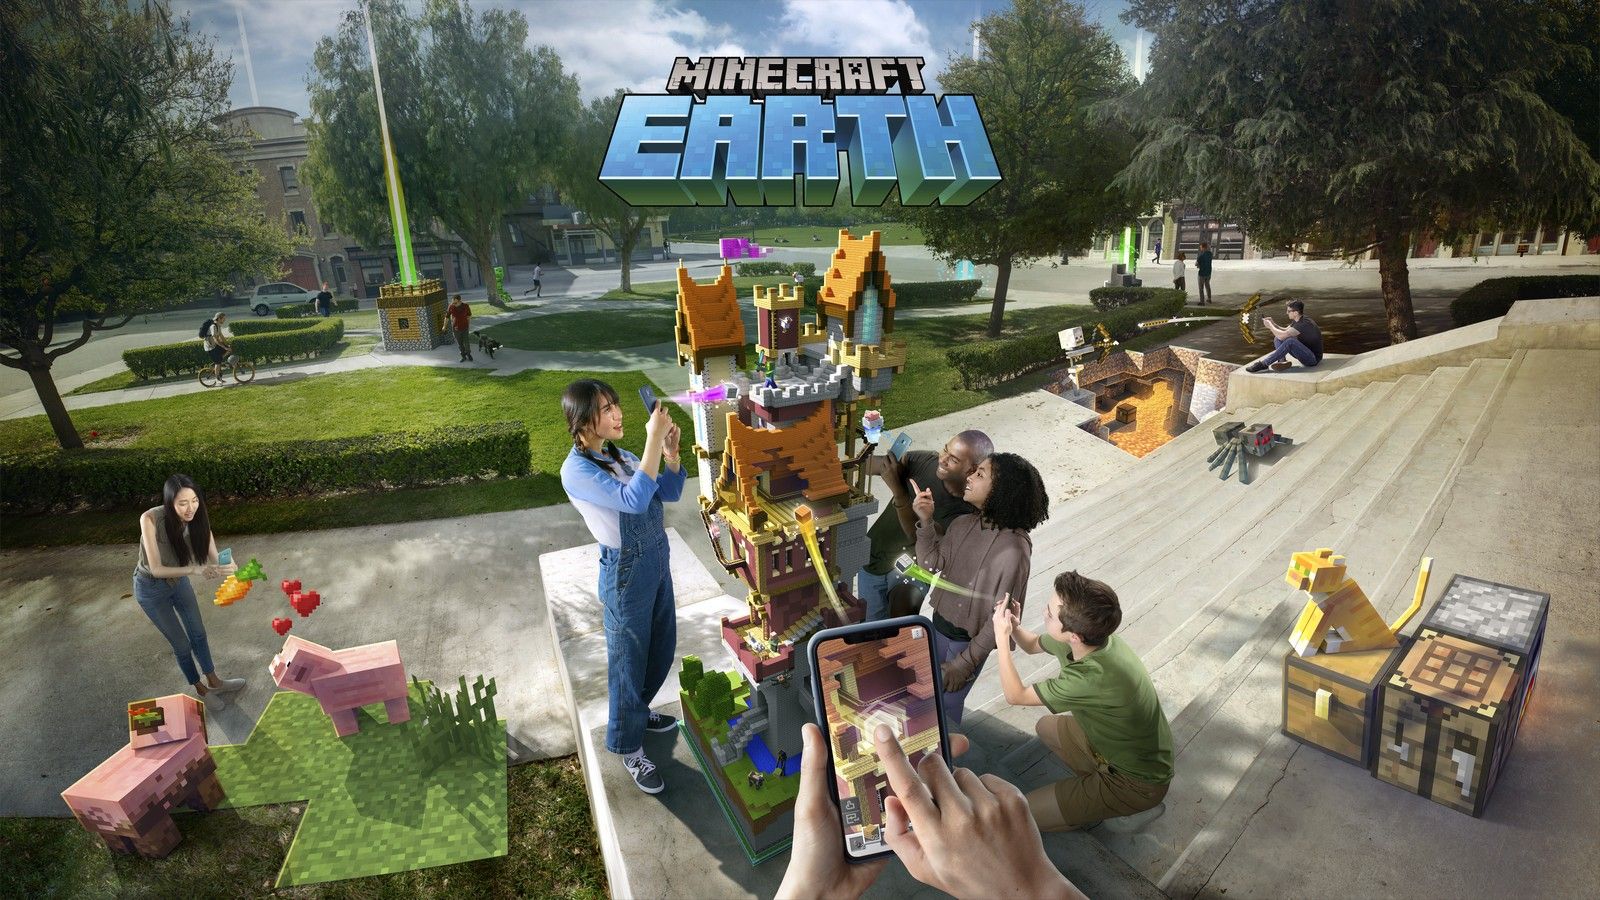 Minecraft Earth, a new AR game, has landed in the US in early access